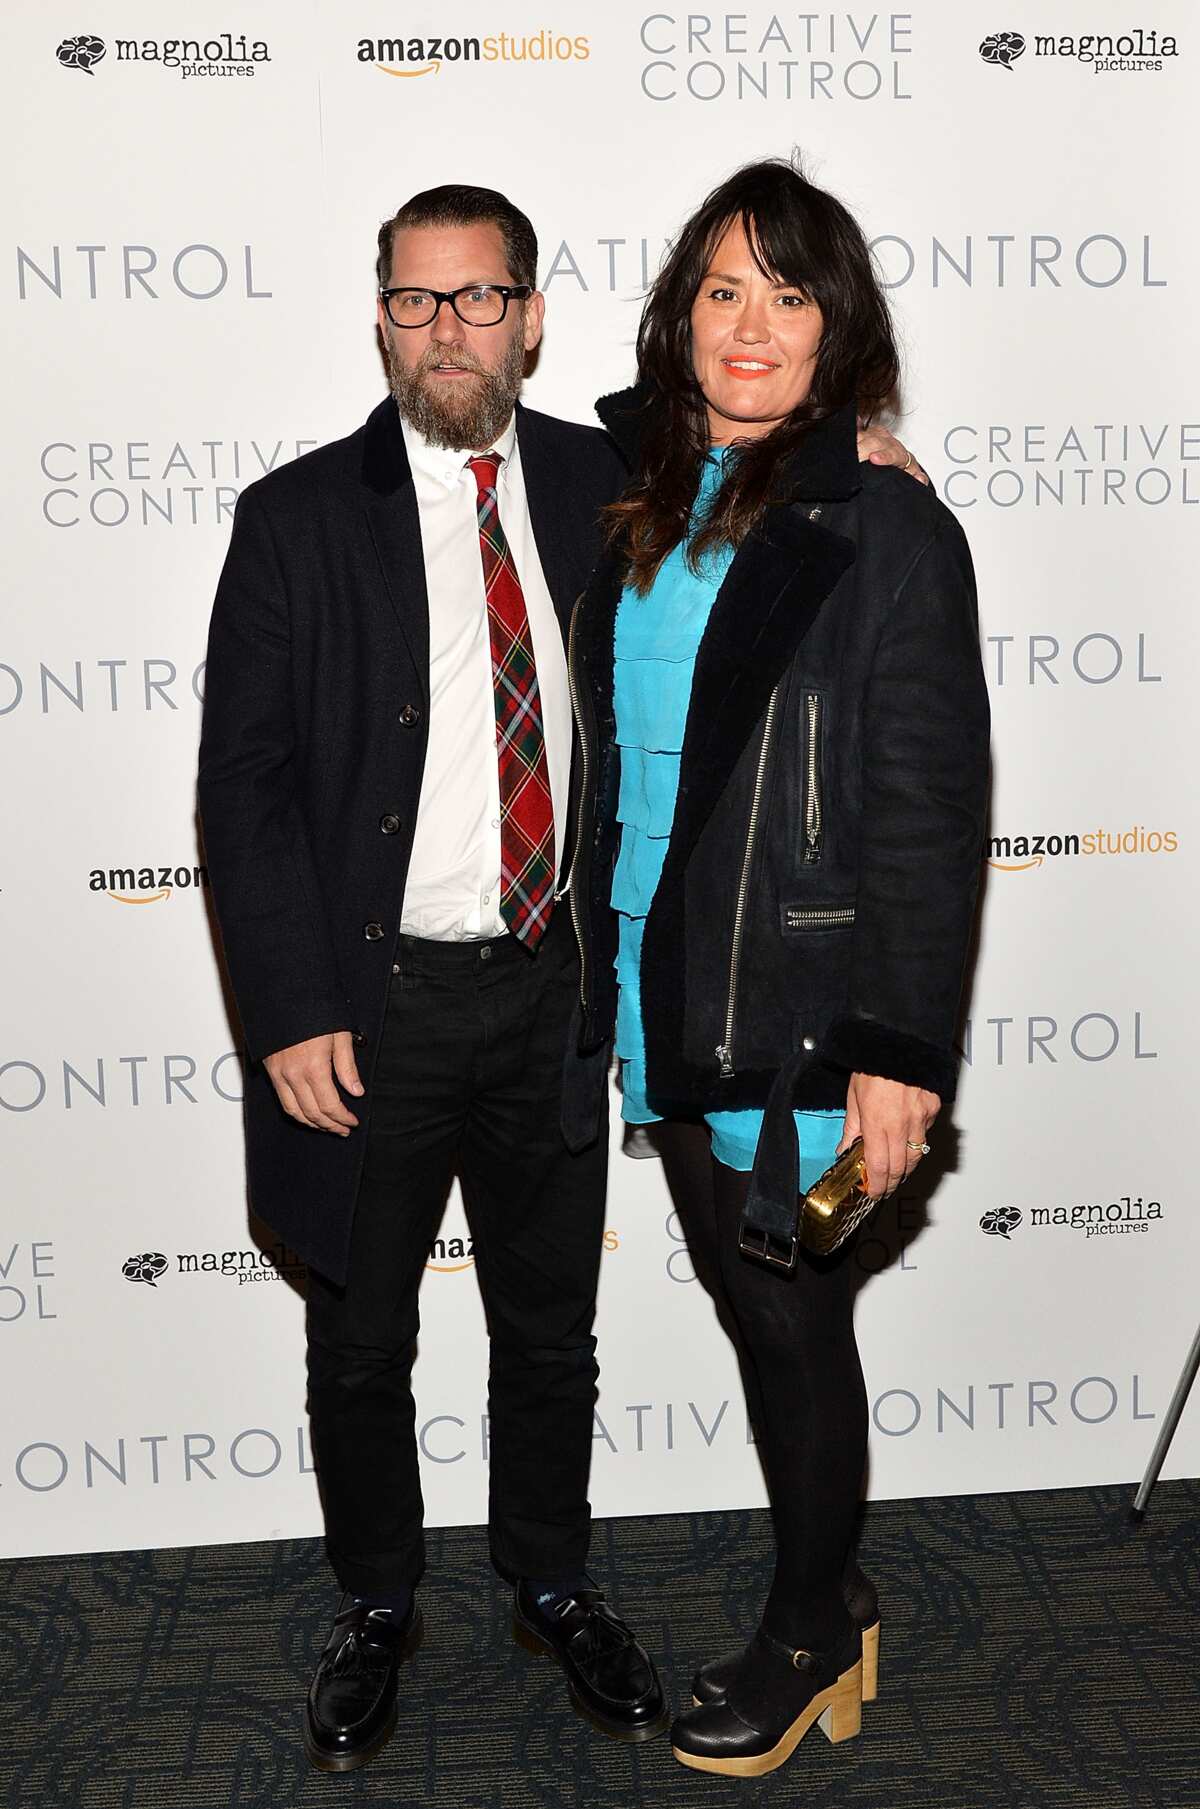 Emily Jendrisak biography what is known about Gavin McInnes' wife